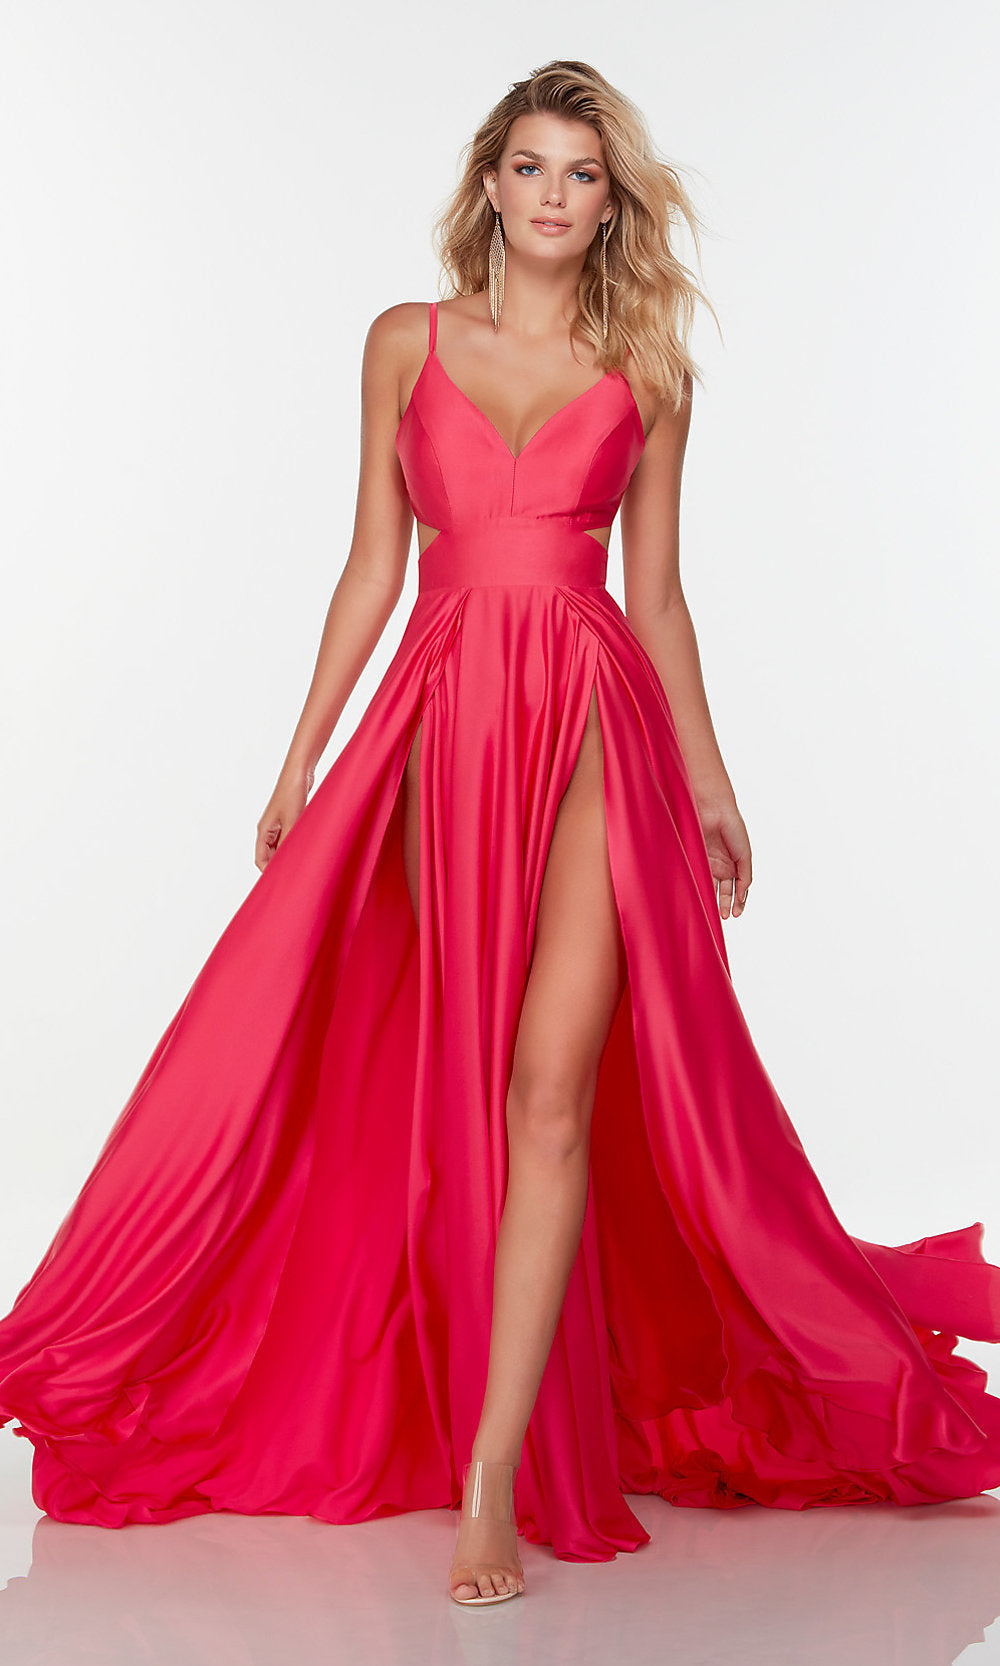 Strappy-Back Long Sexy Shimmer Formal Prom Dress